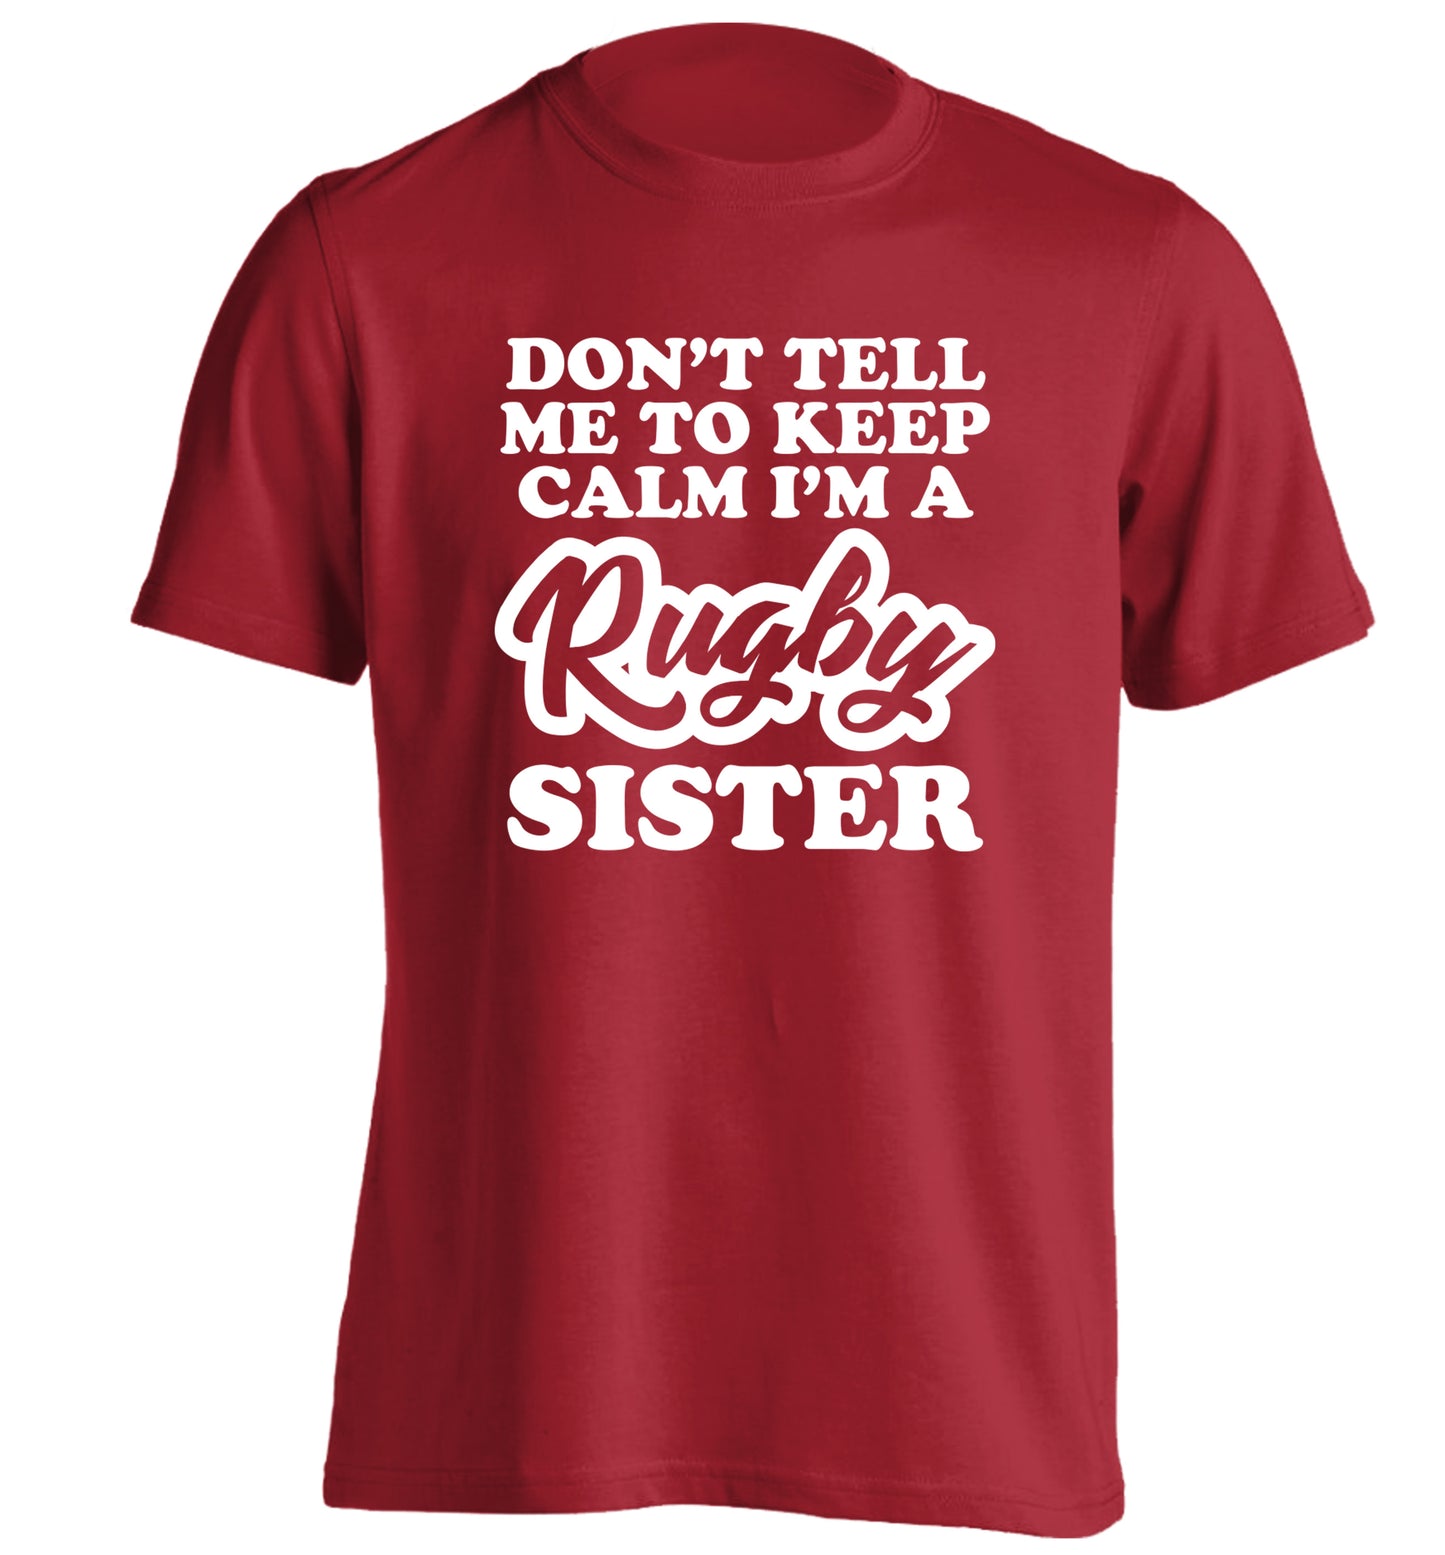 Don't tell me keep calm I'm a rugby sister adults unisex red Tshirt 2XL